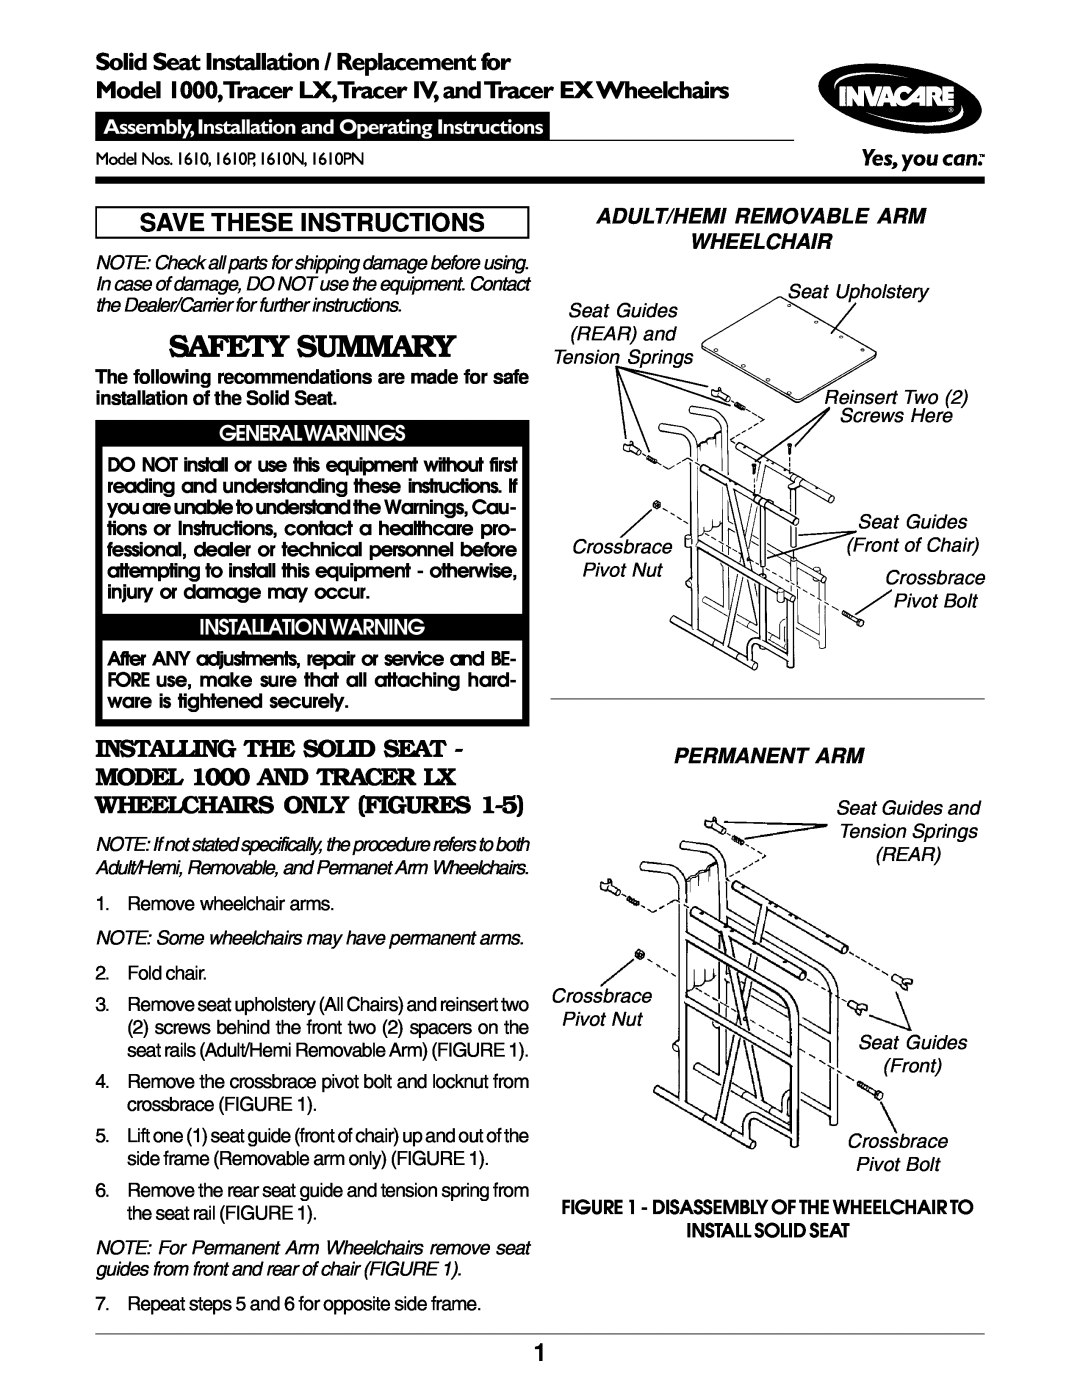 Invacare 1610N operating instructions Adult/Hemi Removable Arm Wheelchair, Permanent Arm, Safety Summary, Generalwarnings 